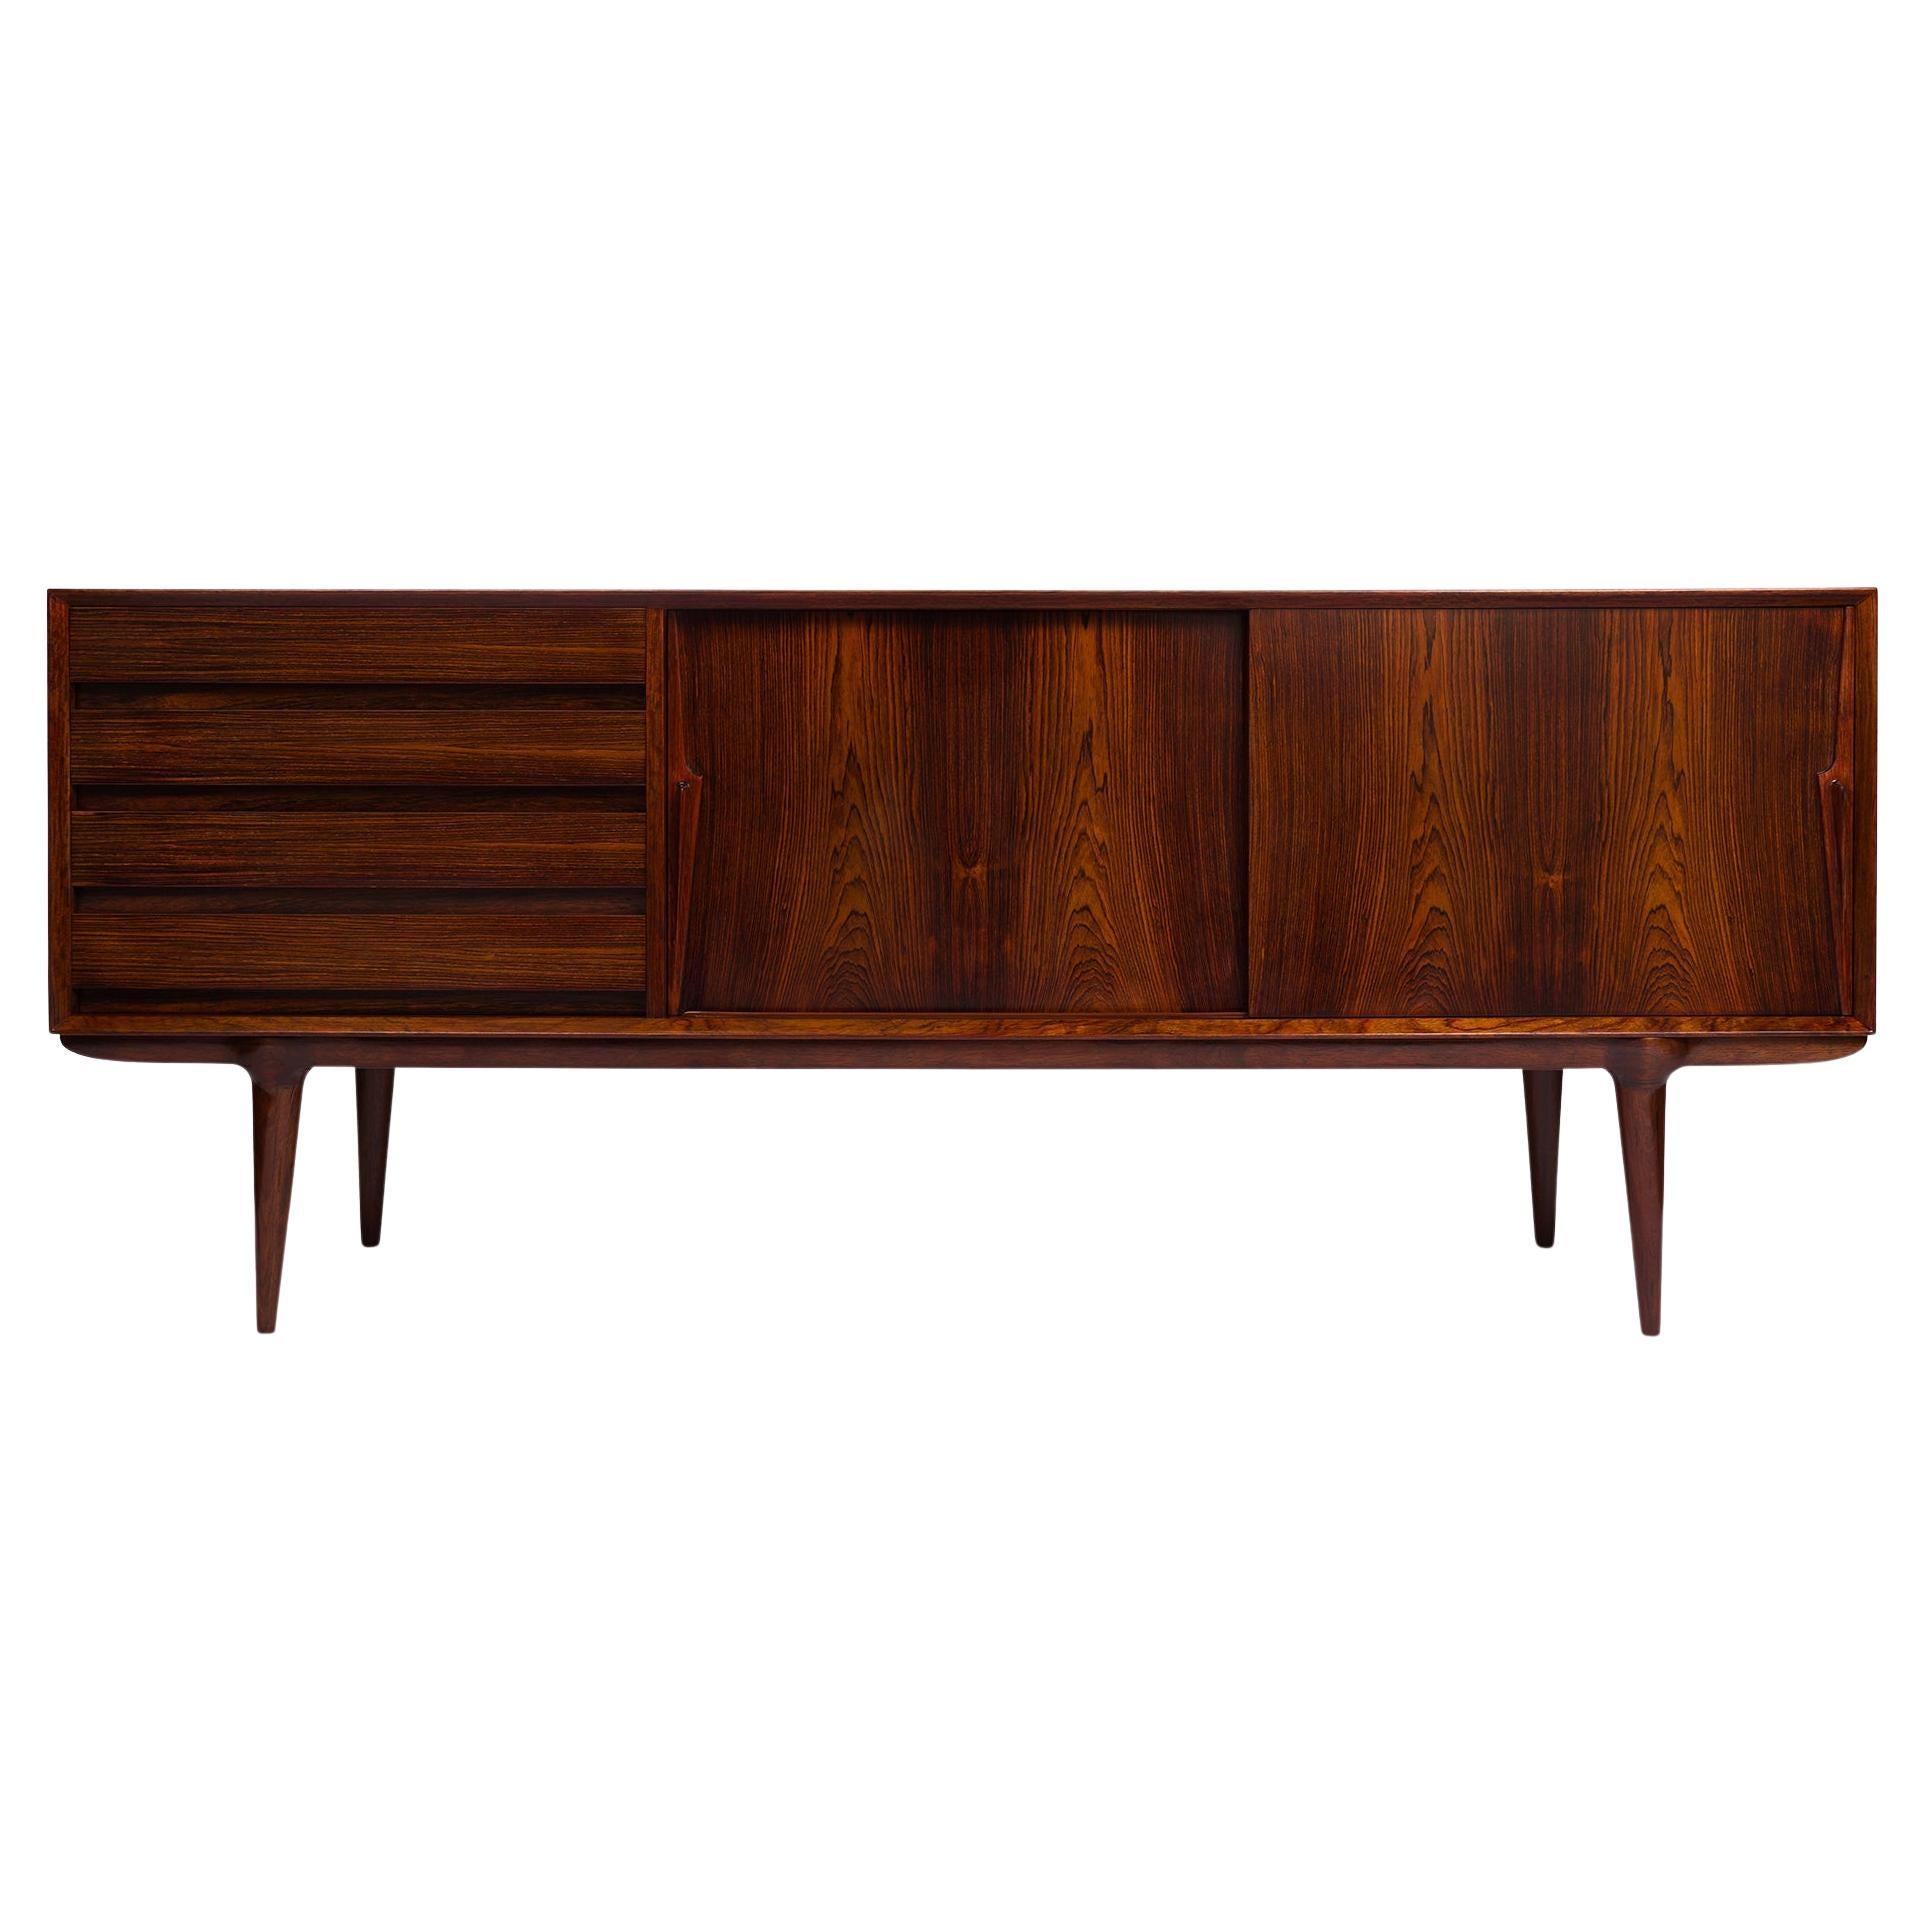 Omann Jun Møbelfabrik, established in 1933 by Andreas Omann, stands as a hallmark of iconic Danish design from the 1950s and 1960s. Renewed in production, this esteemed family-owned enterprise reintroduces the legendary Model 18 credenza, catering